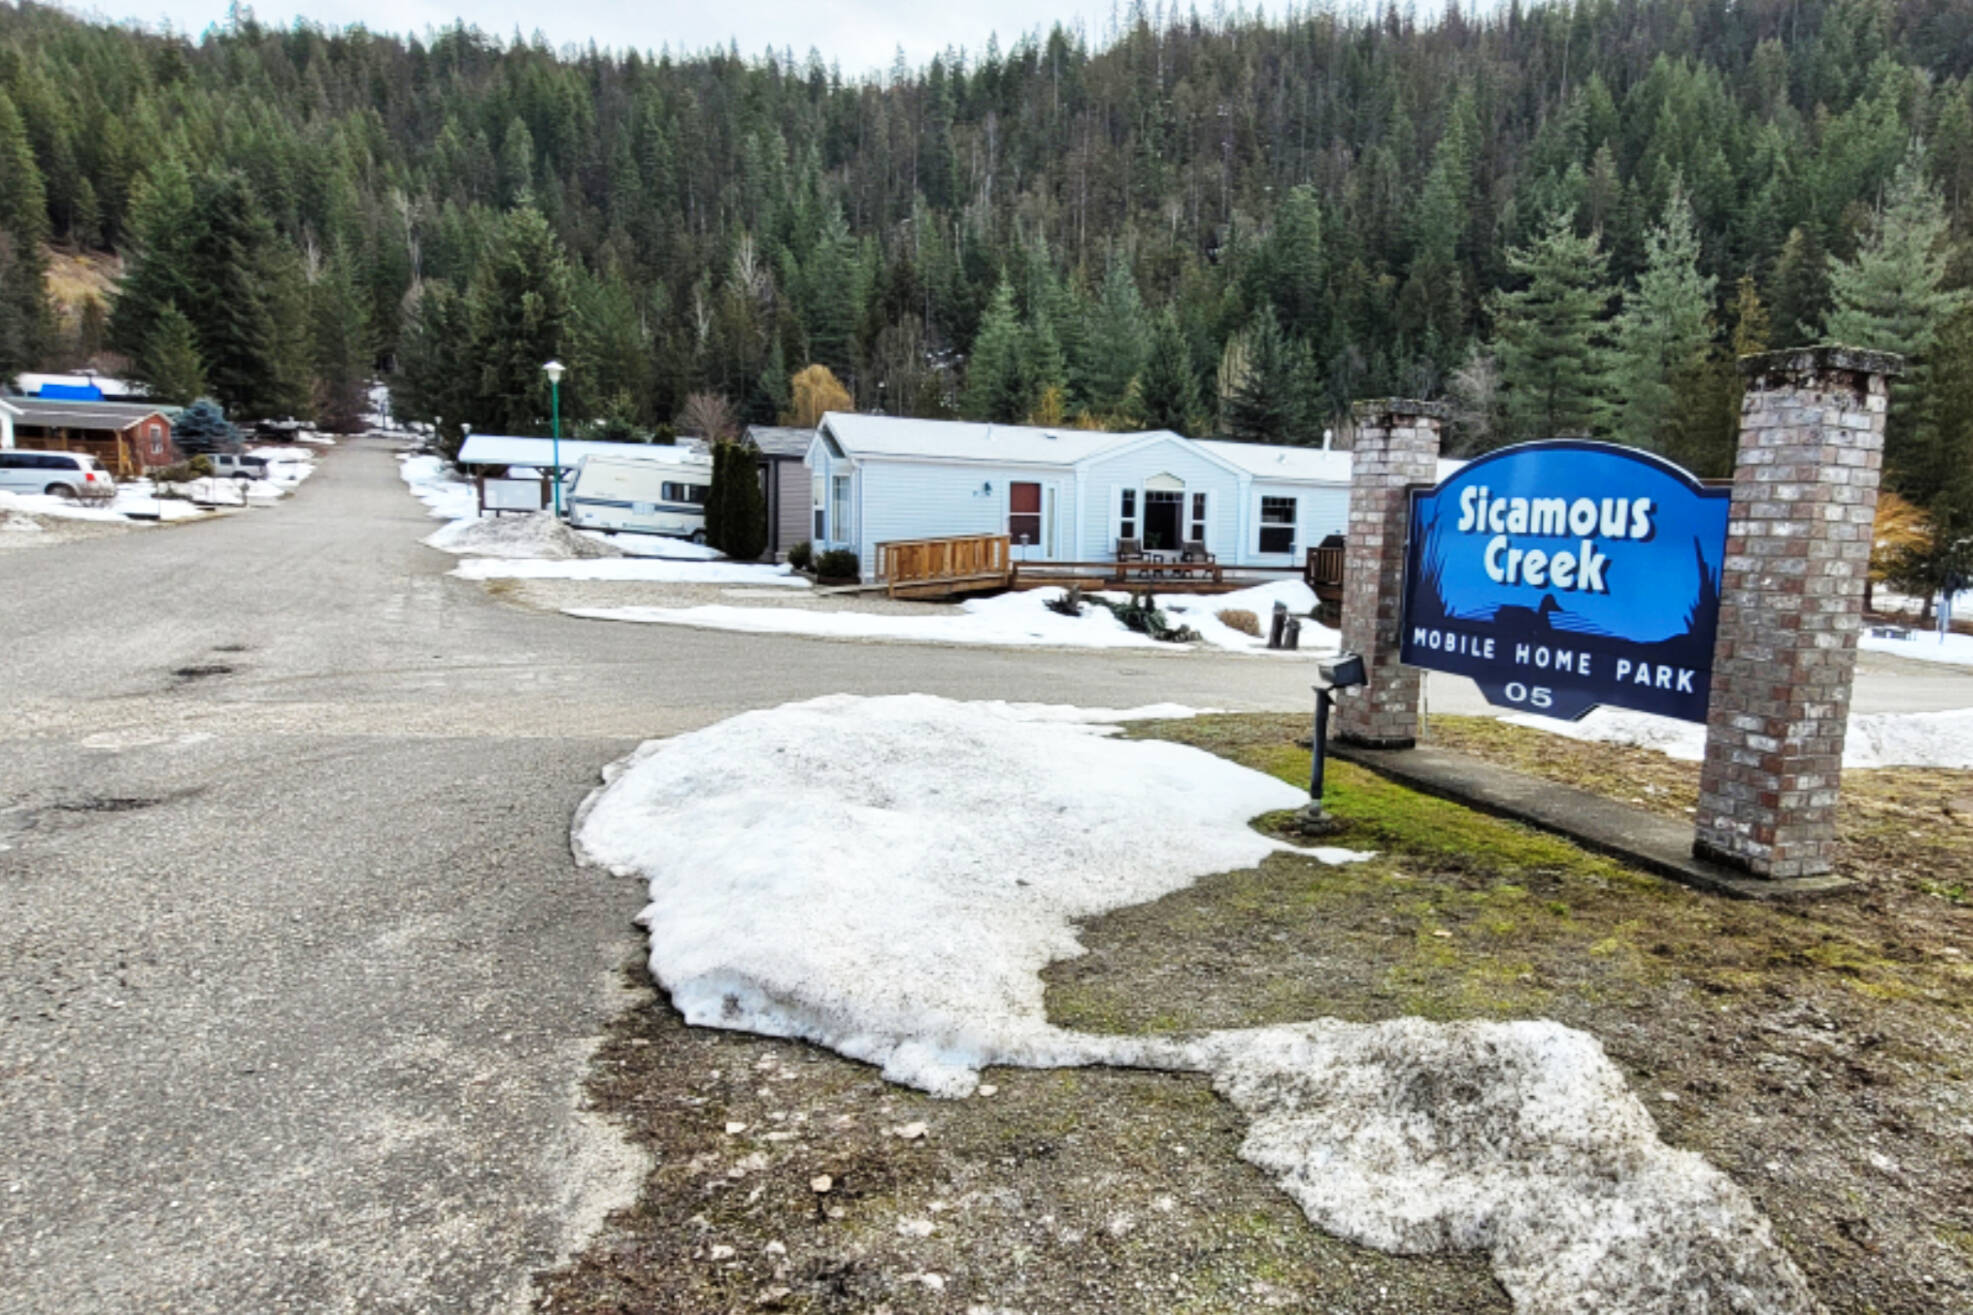 An evacuation alert was issued for all residences of the Sicamous Creek Mobile Home Park on Monday, June 13, 2022. (File photo)